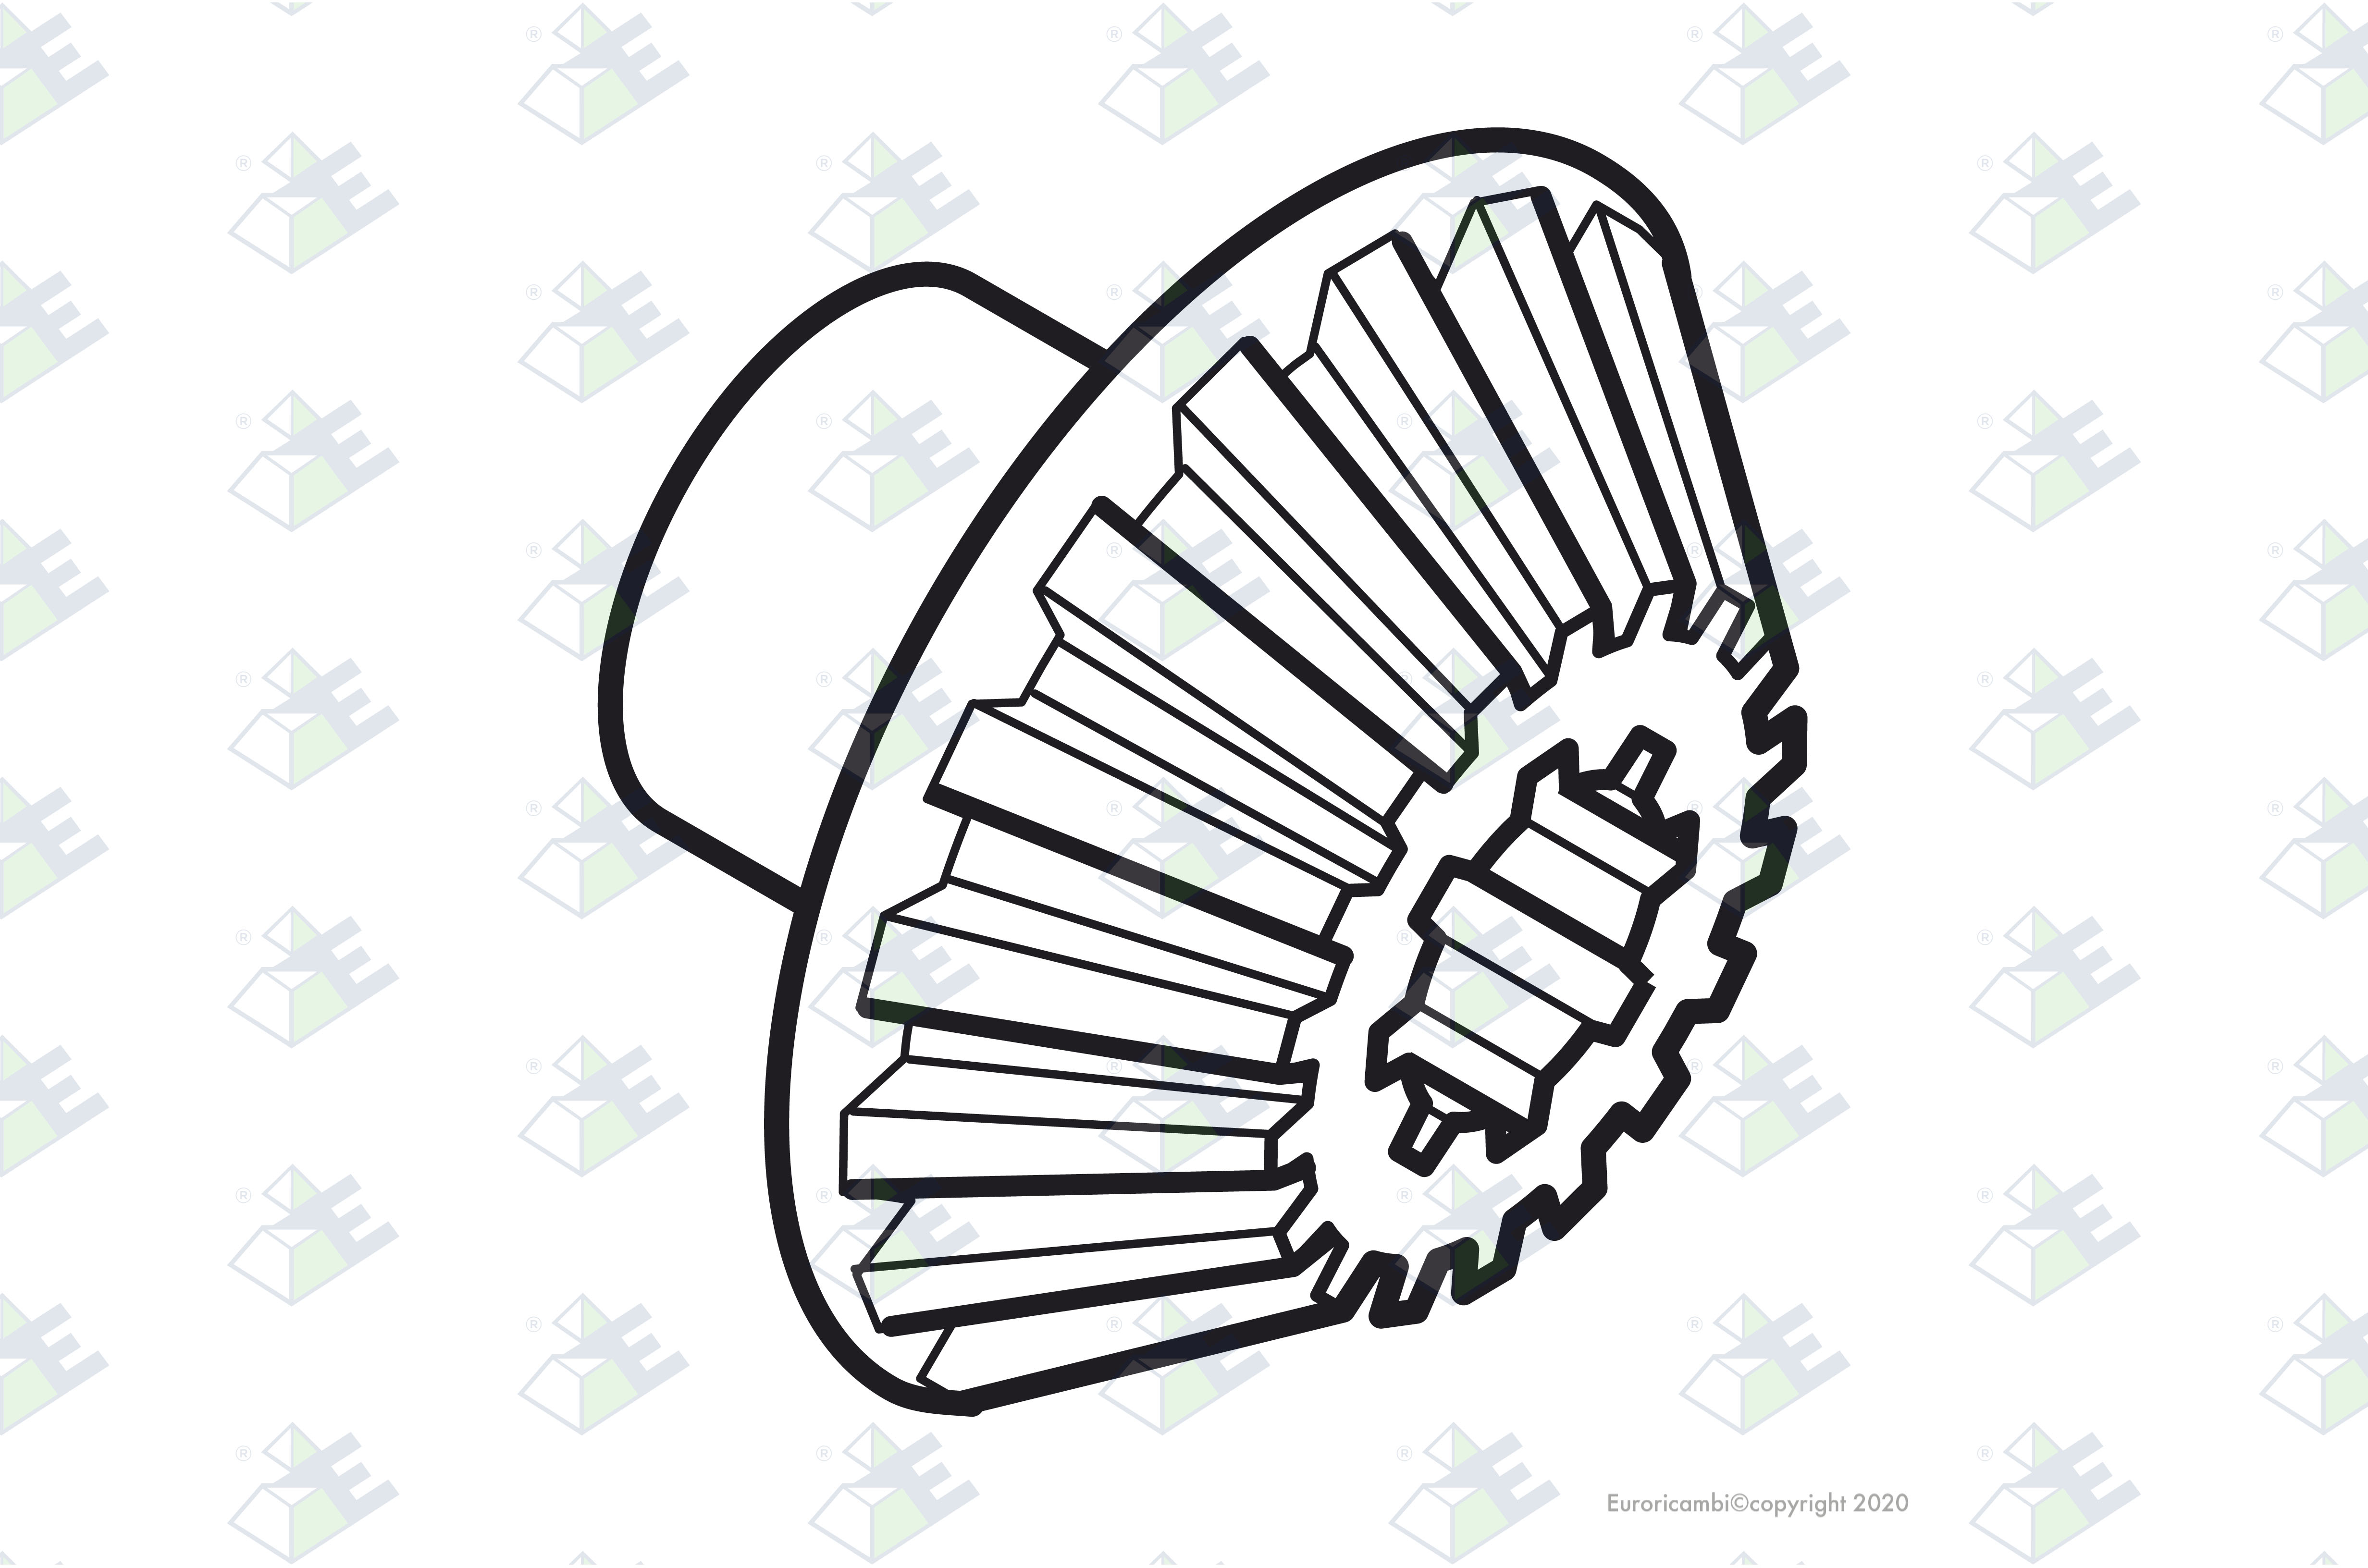 SIDE GEAR 18 T - 22 SPL. suitable to S C A N I A 174979